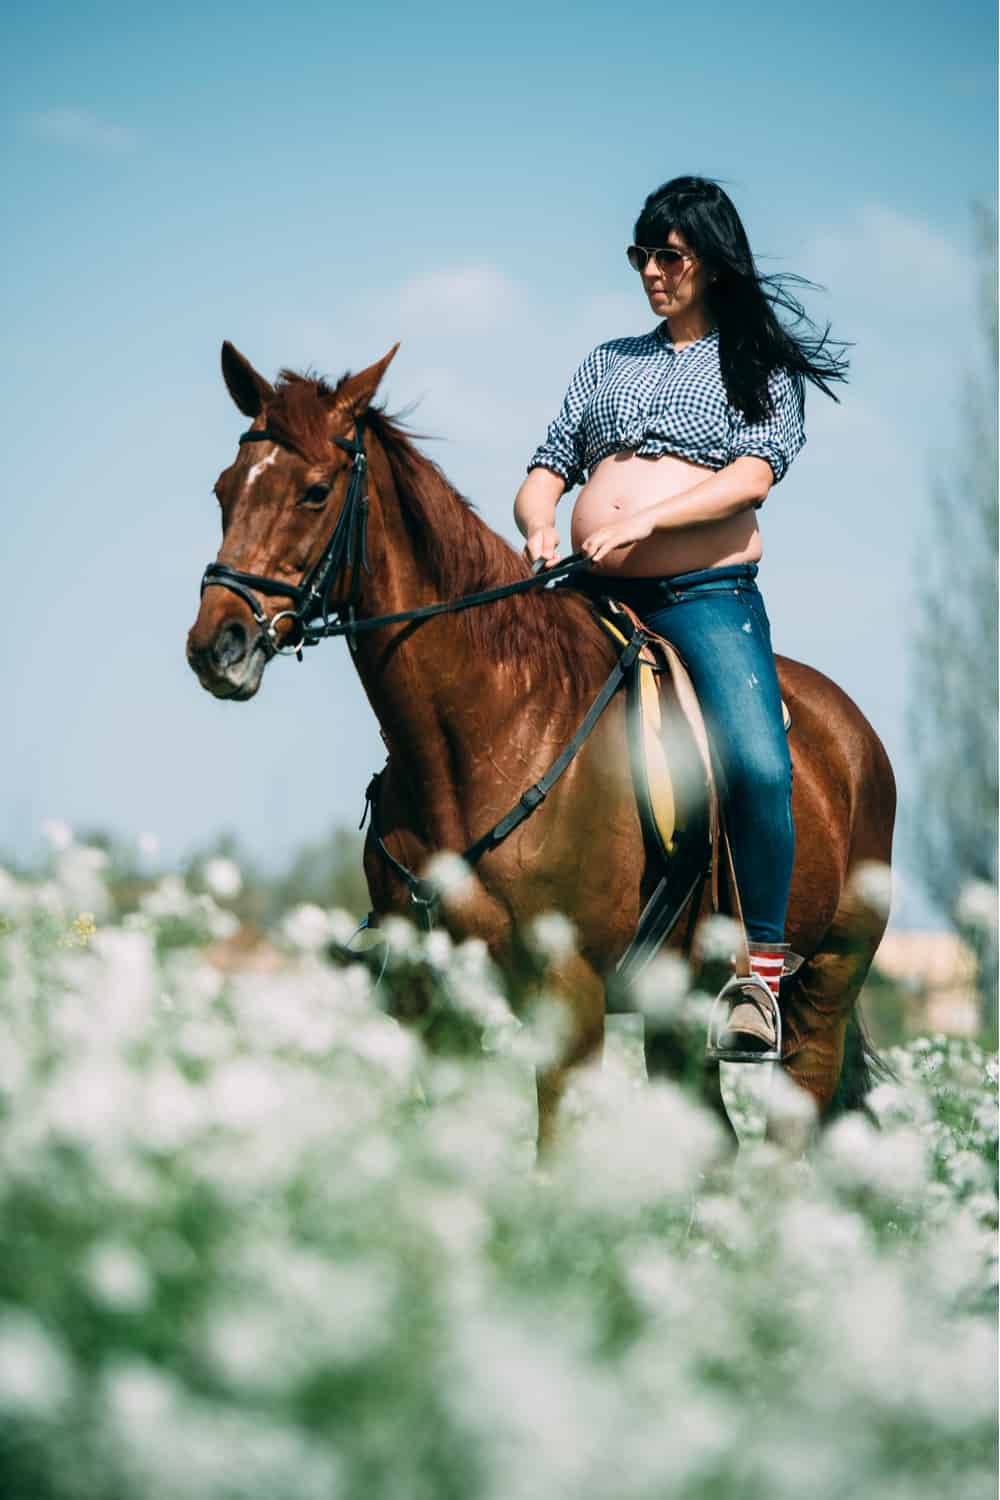 Will it be Safe to Ride a Horse if you are Pregnant